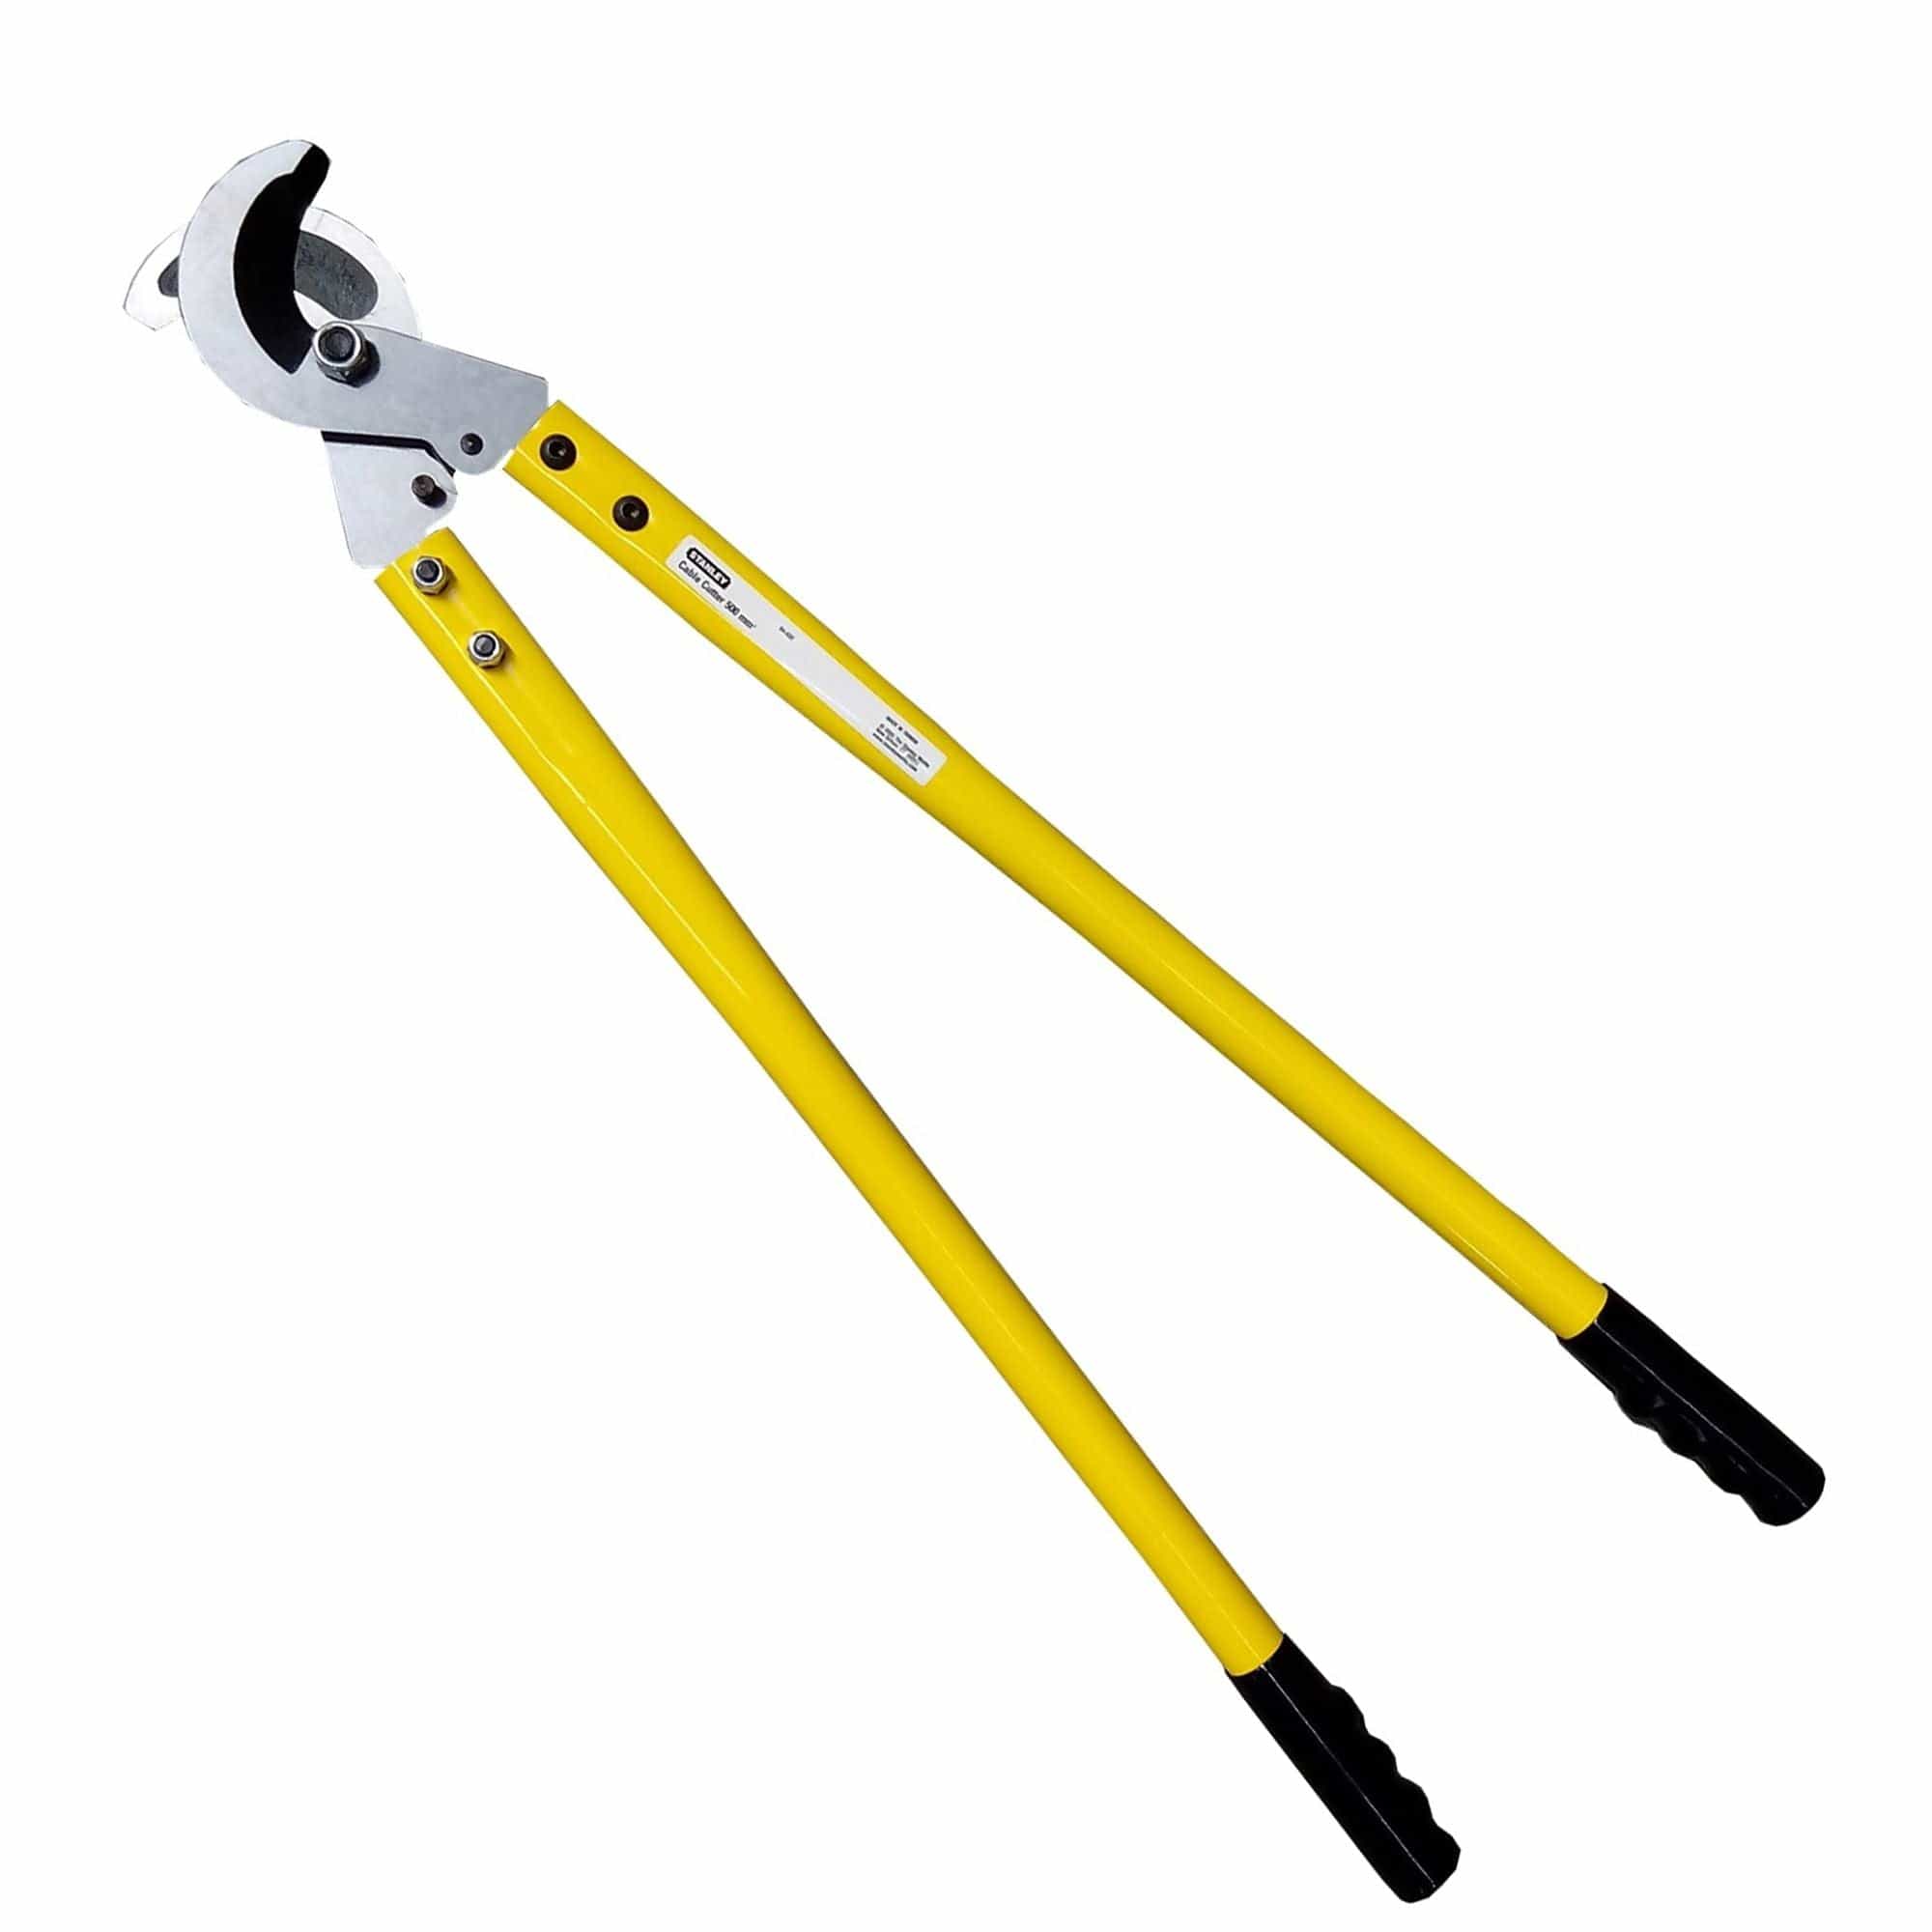 Total Cable Cutter 8'' - THT11581 | Supply Master Accra, Ghana Hand Saws & Cutting Tools Buy Tools hardware Building materials